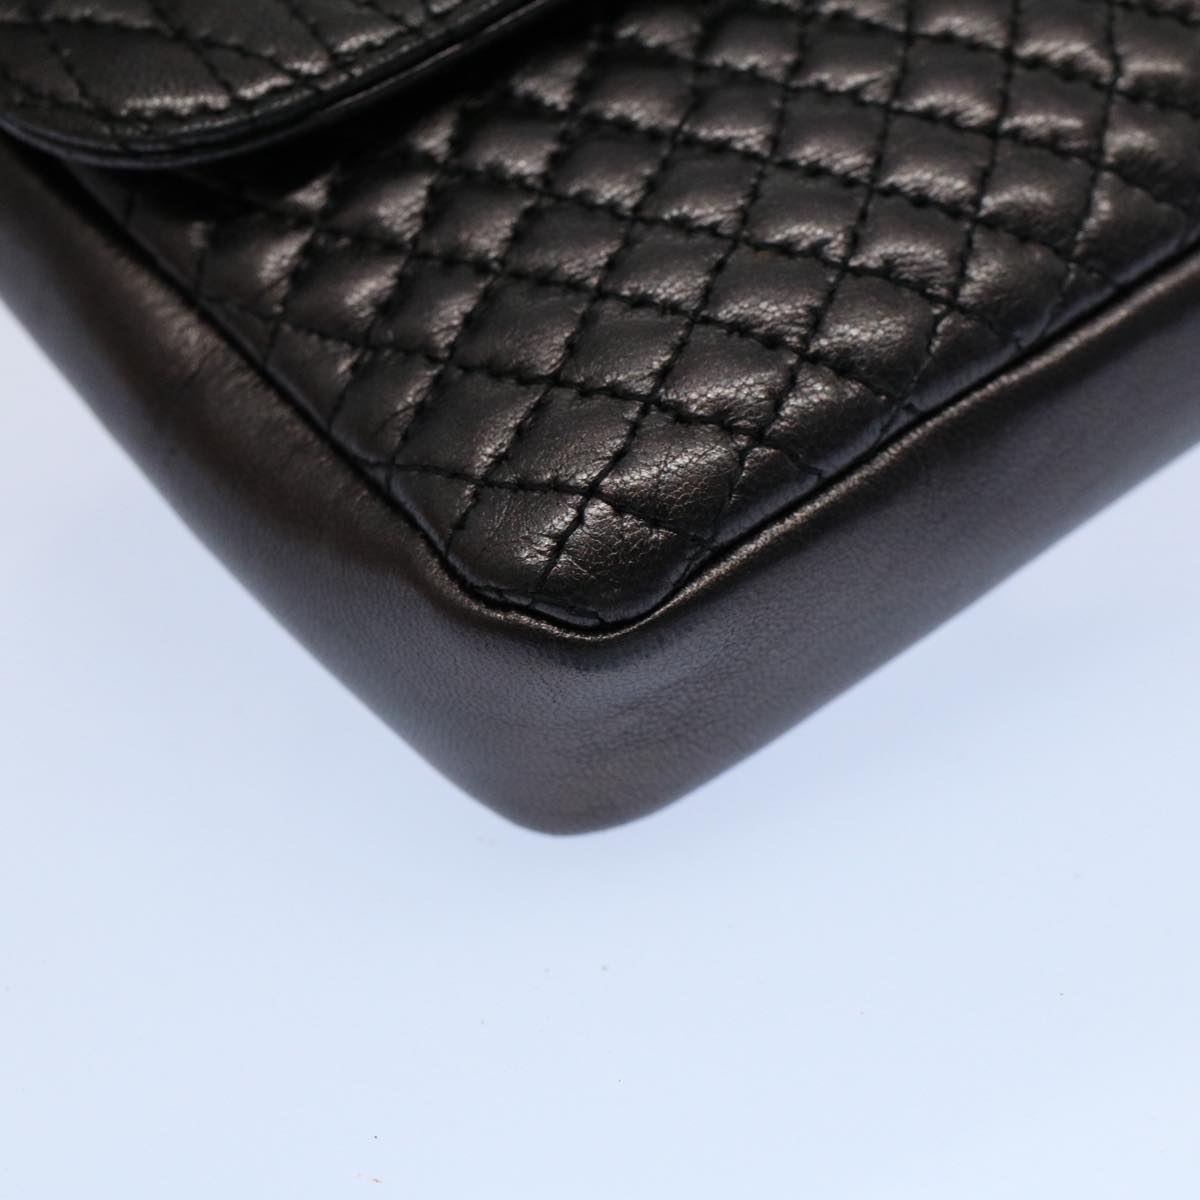 BALLY Chain Quilted Shoulder Bag Leather Black Auth am5053